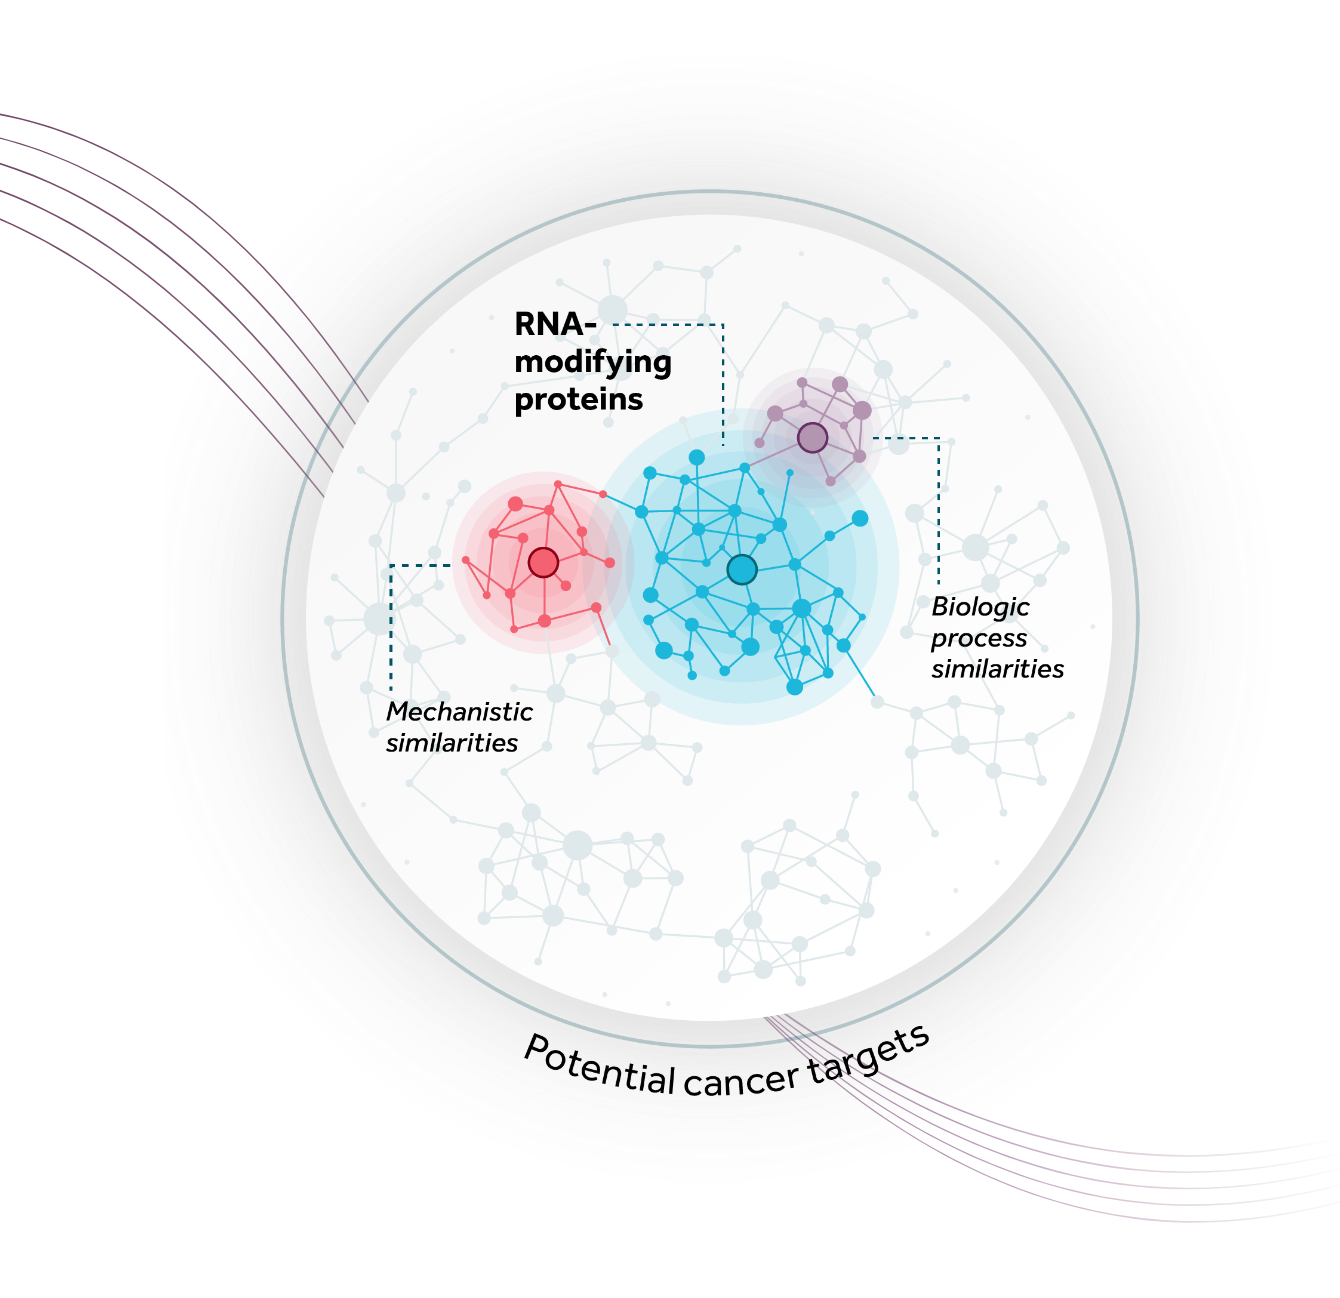 Abstract circular graphic with connected dots representing potential cancer targets. Blue shading within the circle represents RNA modifying protein targets. Pink and blue purple shading represent adjacent high-value targets with mechanistic and biologic process similarities.